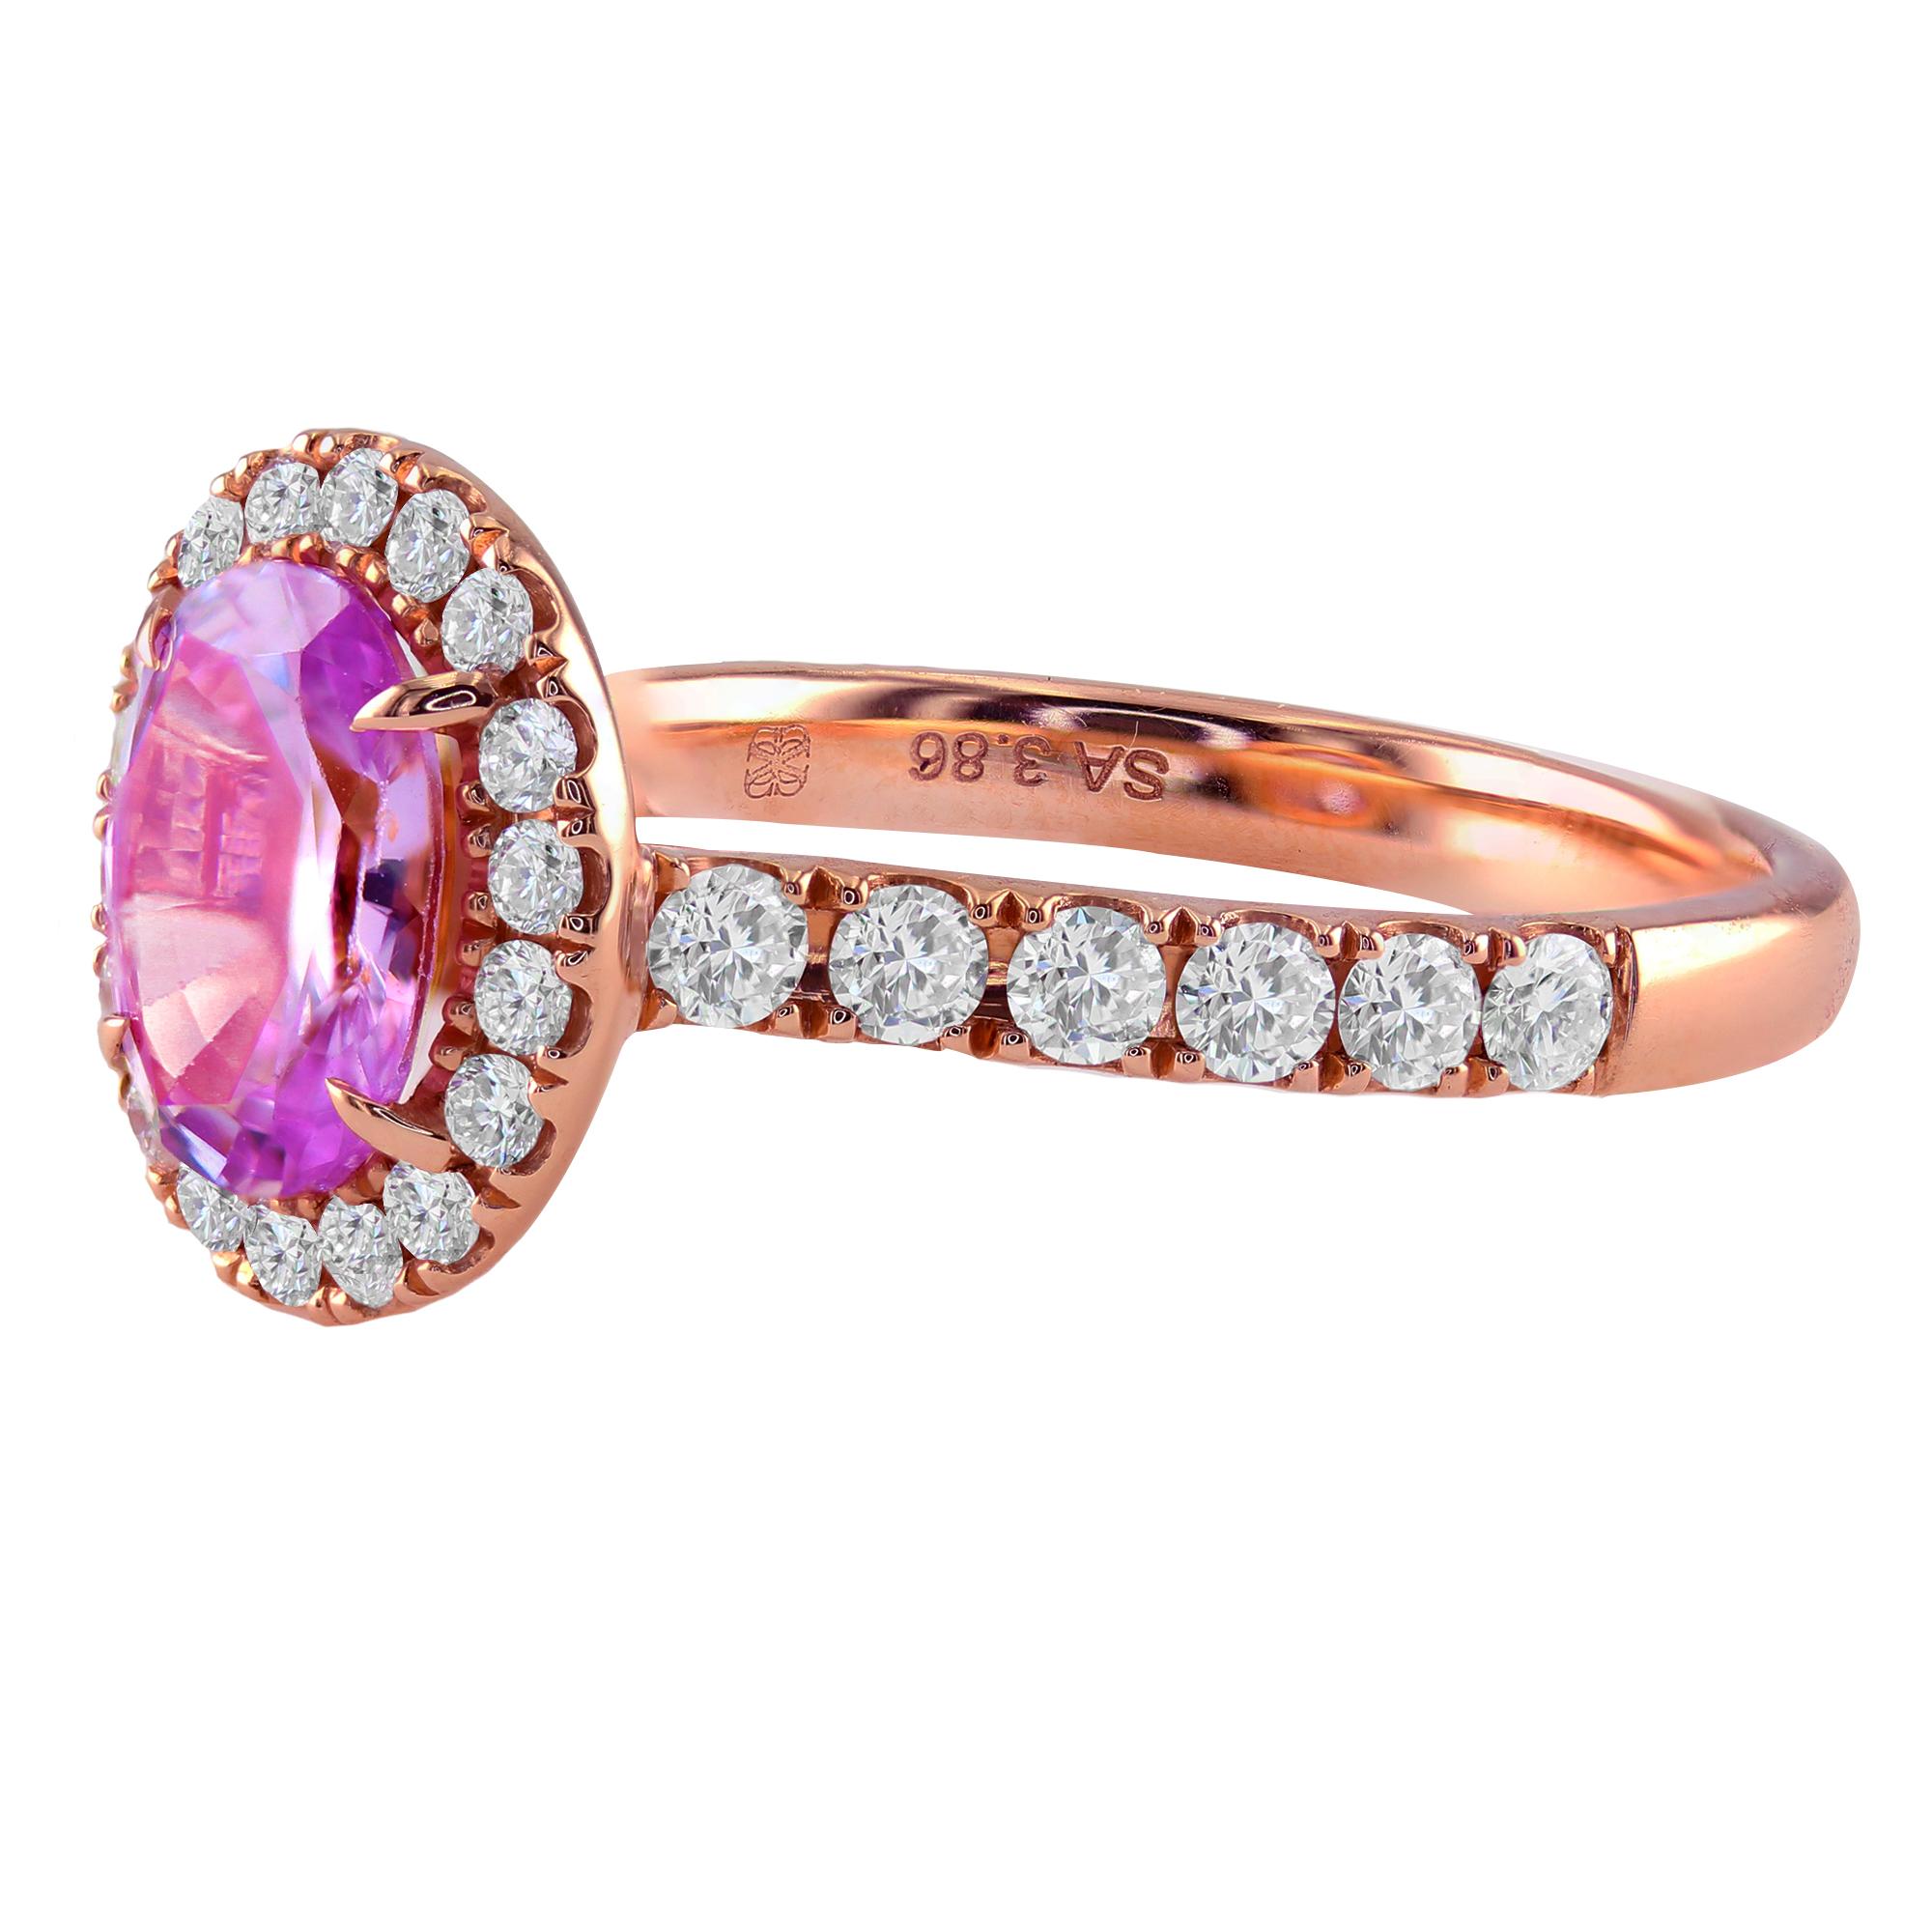 1.57 carat oval pink sapphire ring, surrounded by 0.64 carat round diamonds, set in 18K Rose Gold.

If you are looking for a unique and gorgeous one-of-a-kind engagement ring, this is the perfect piece for you. With its beautiful pink and rose gold